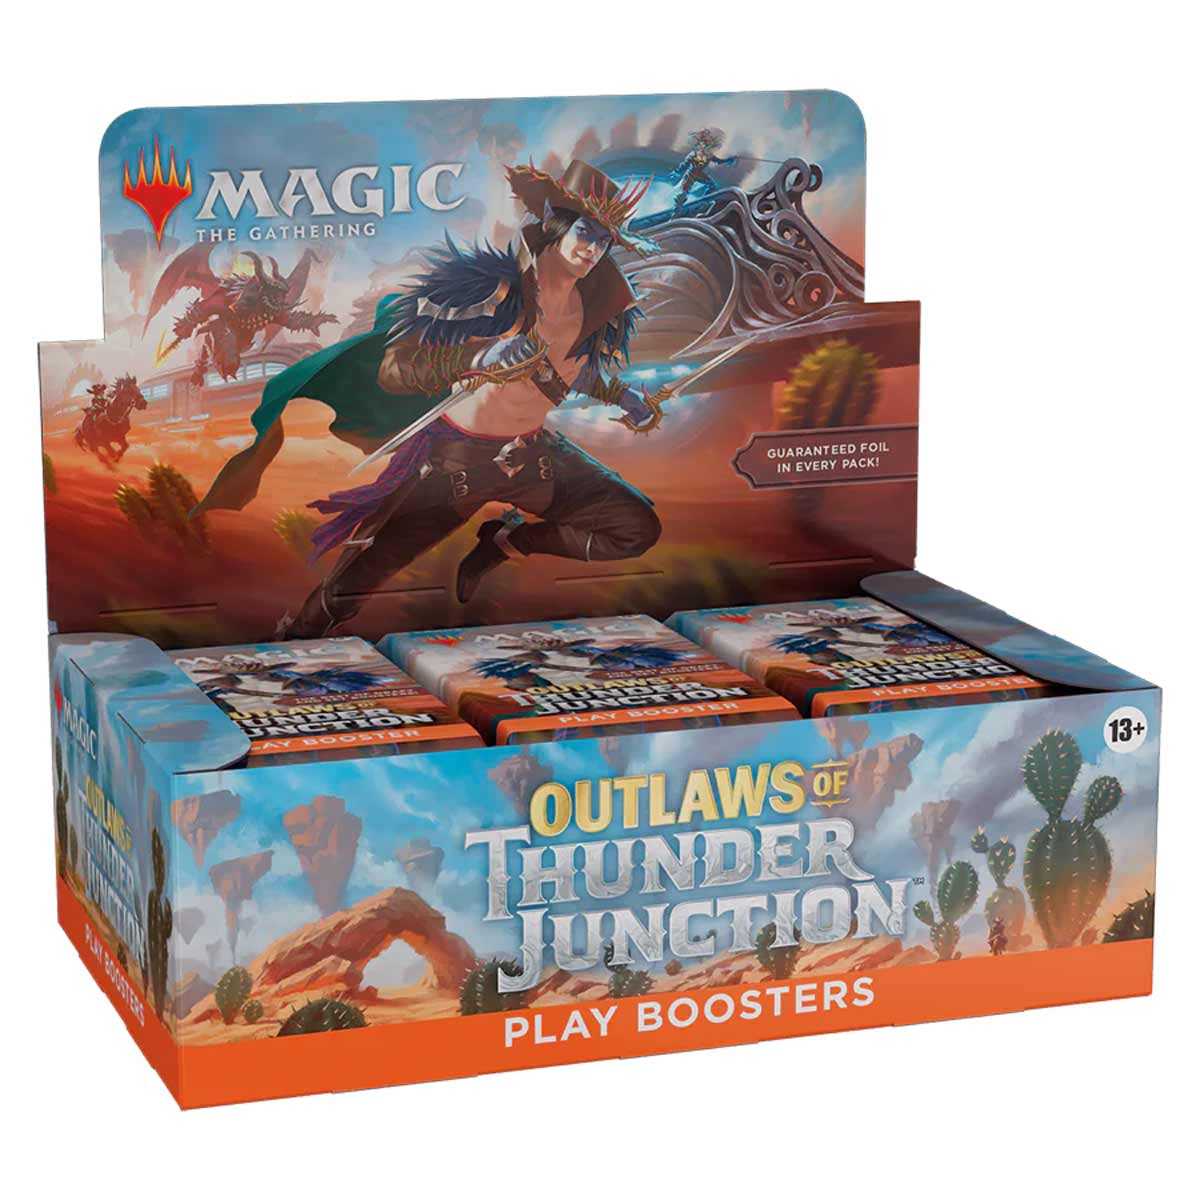 Play Booster Box Outlaws of...